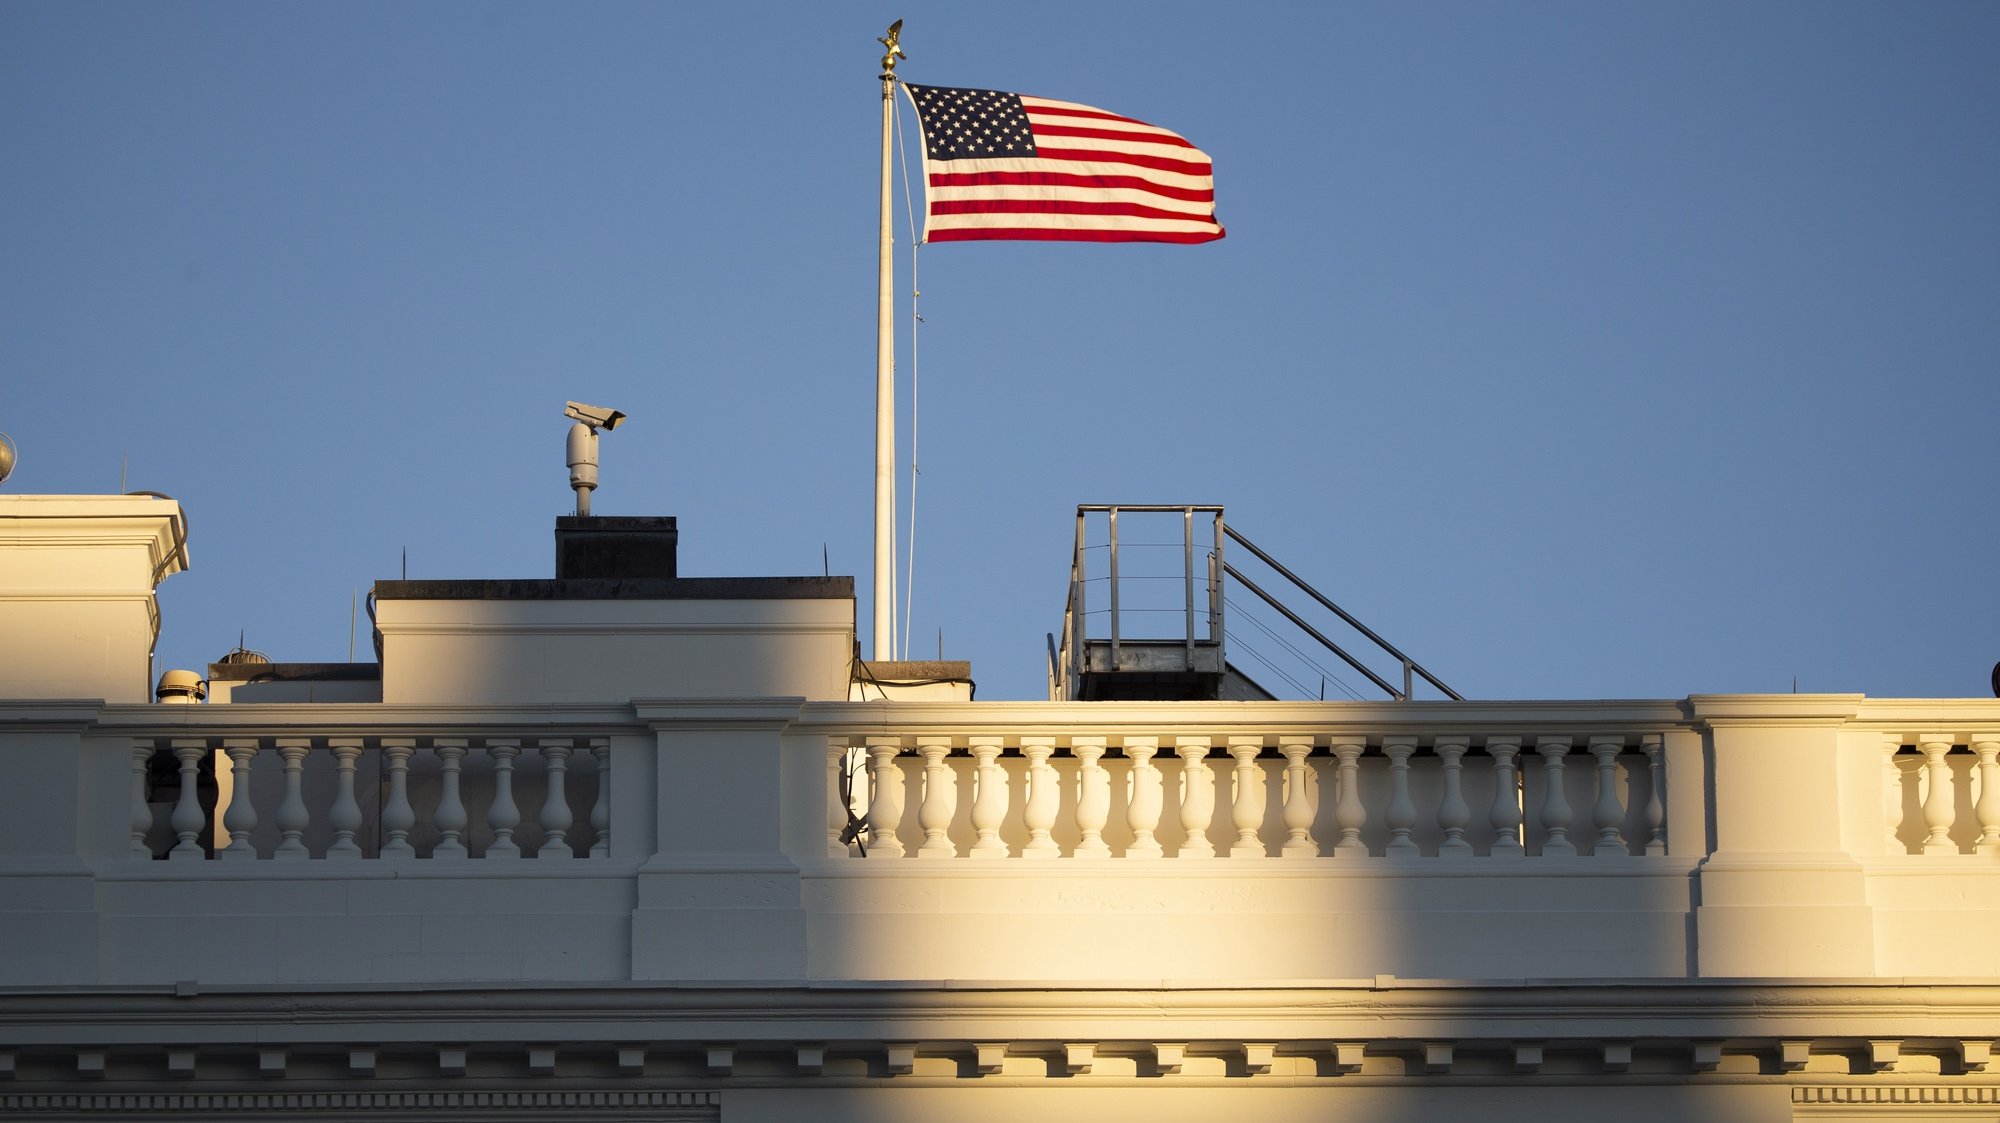 epa08961349 The US national flag is seen above the White House before sunset in Washington, DC, USA, 23 January 2021.  EPA/MICHAEL REYNOLDS / POOL